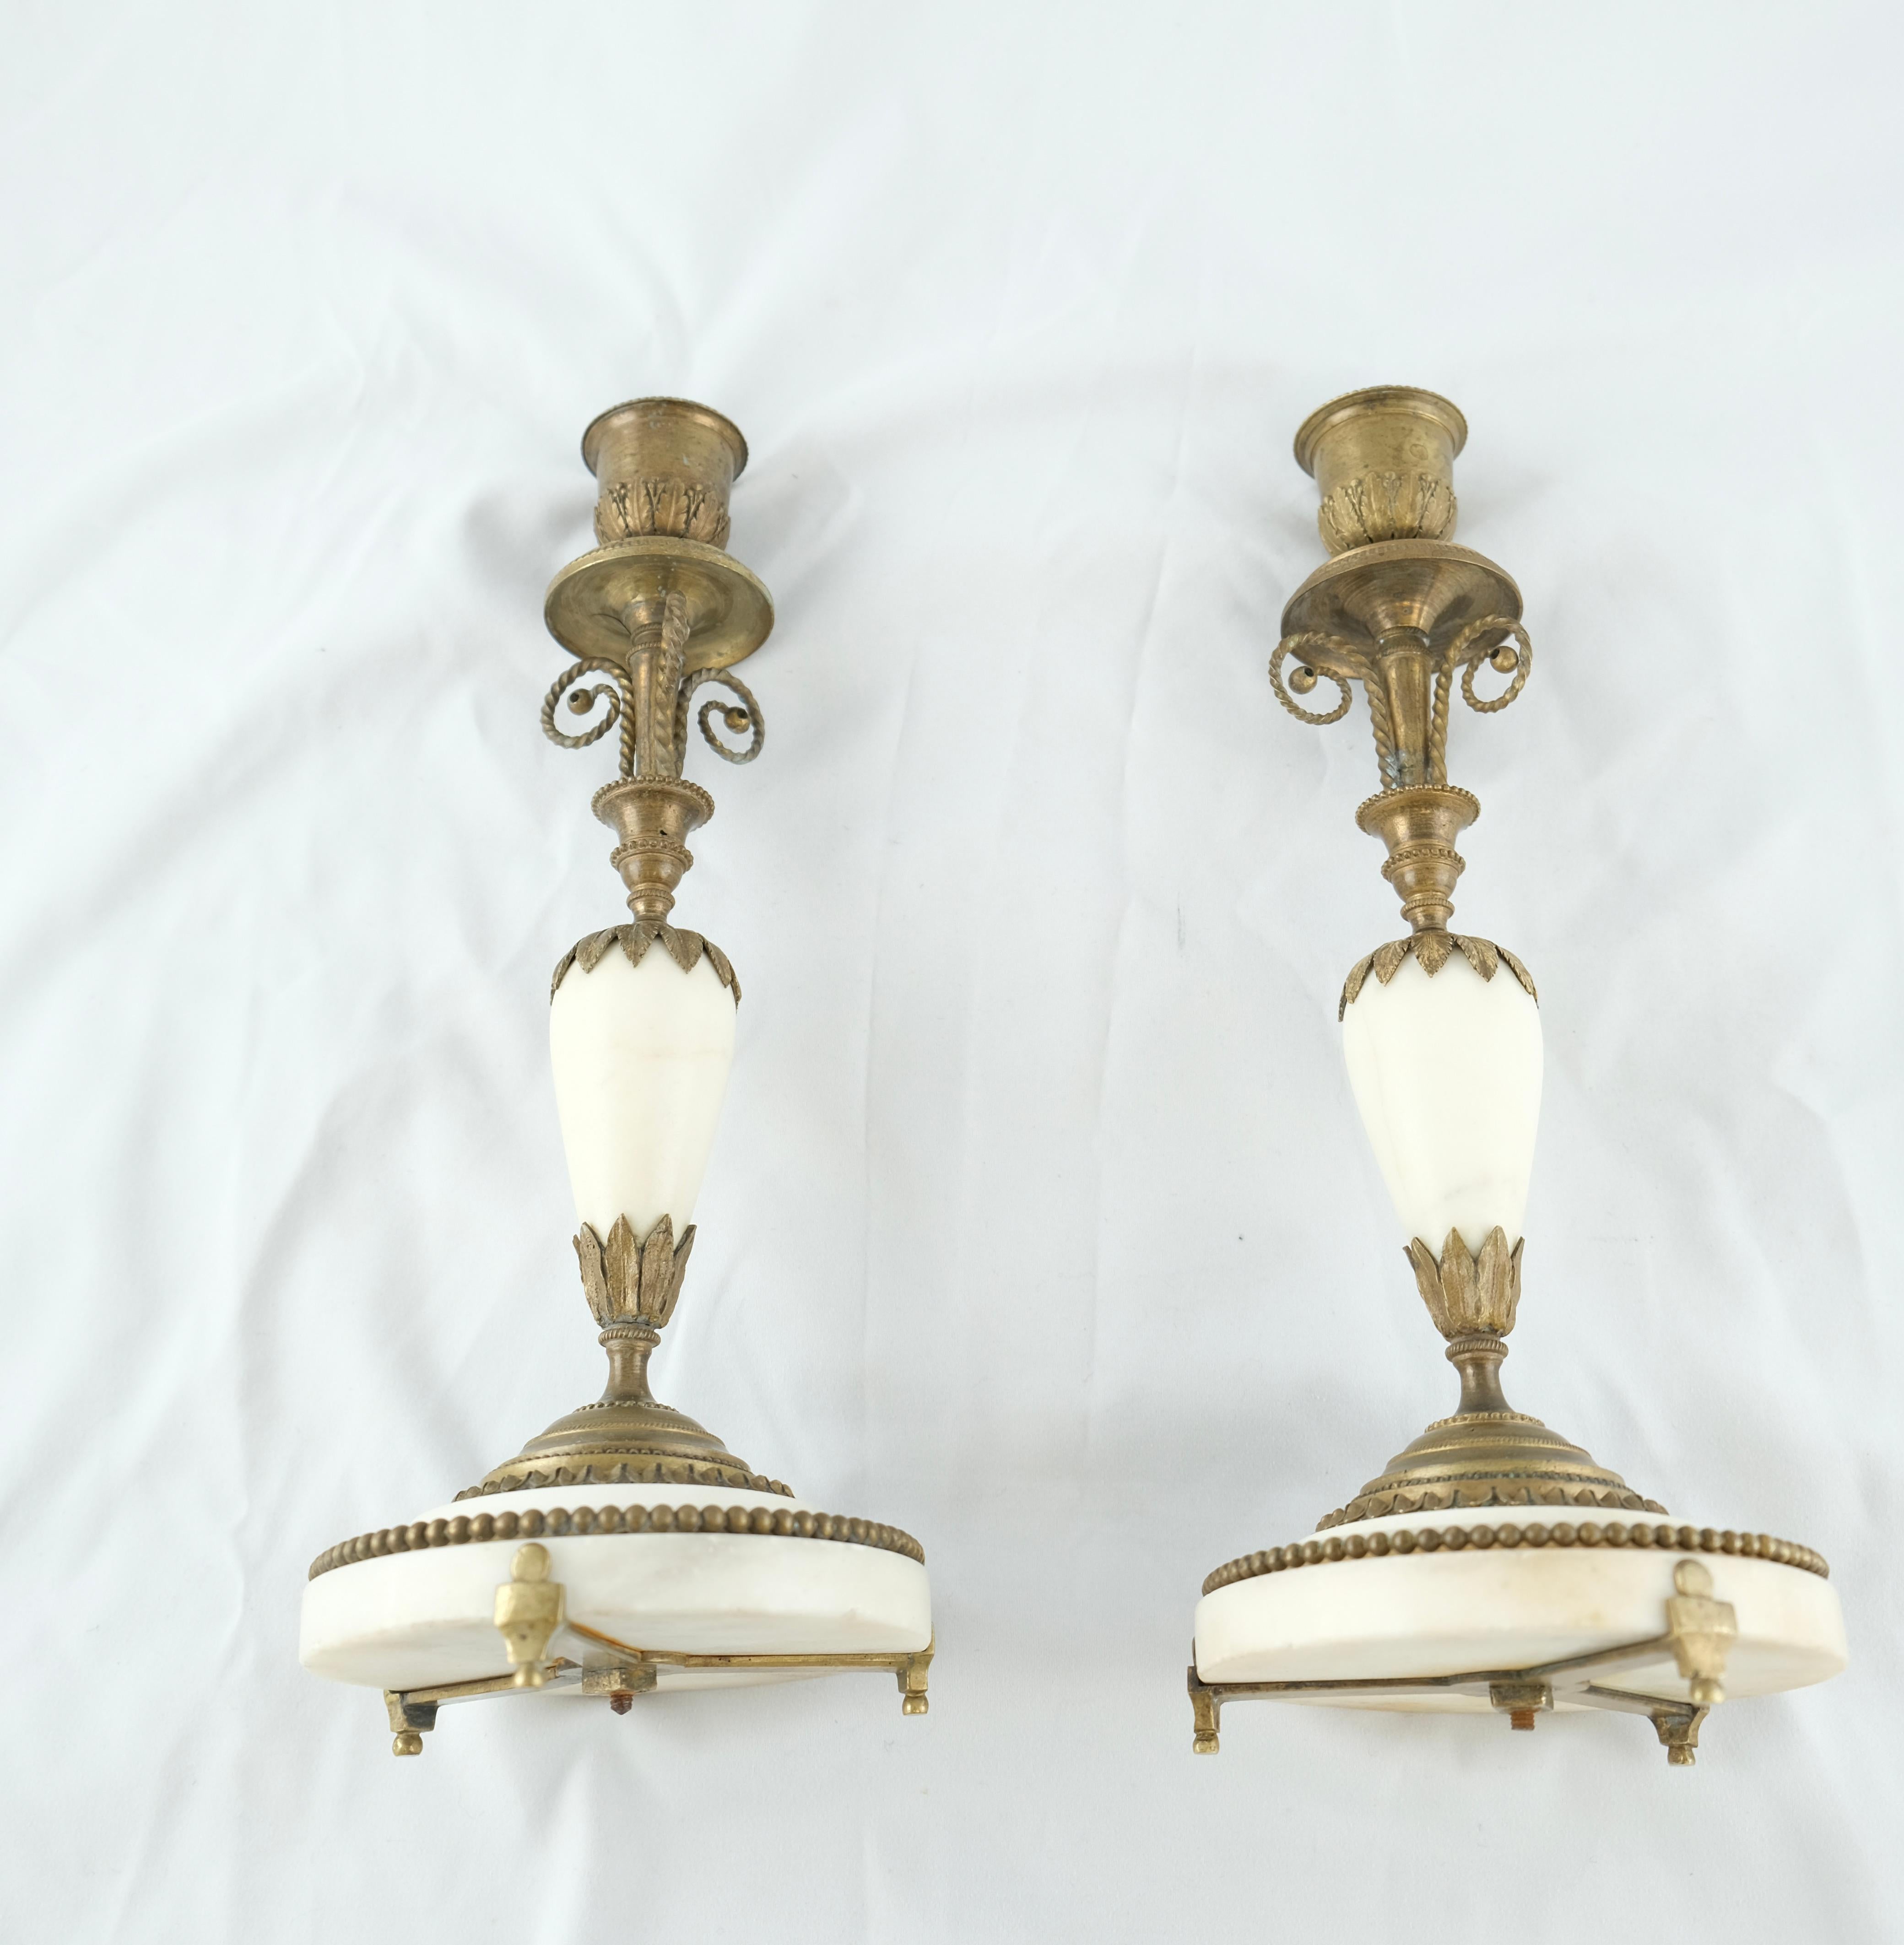 Pair of French Directoire Candlesticks Made in the 1790s For Sale 4